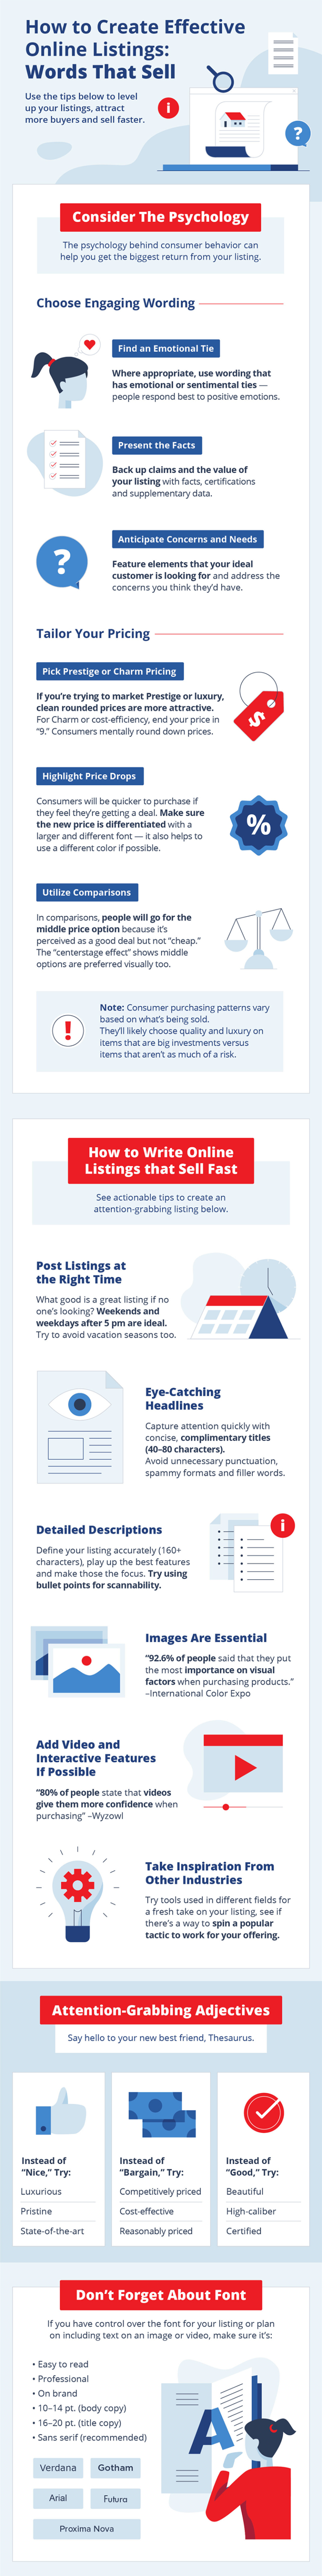 Infographic: How to Create Product Listings That Sell